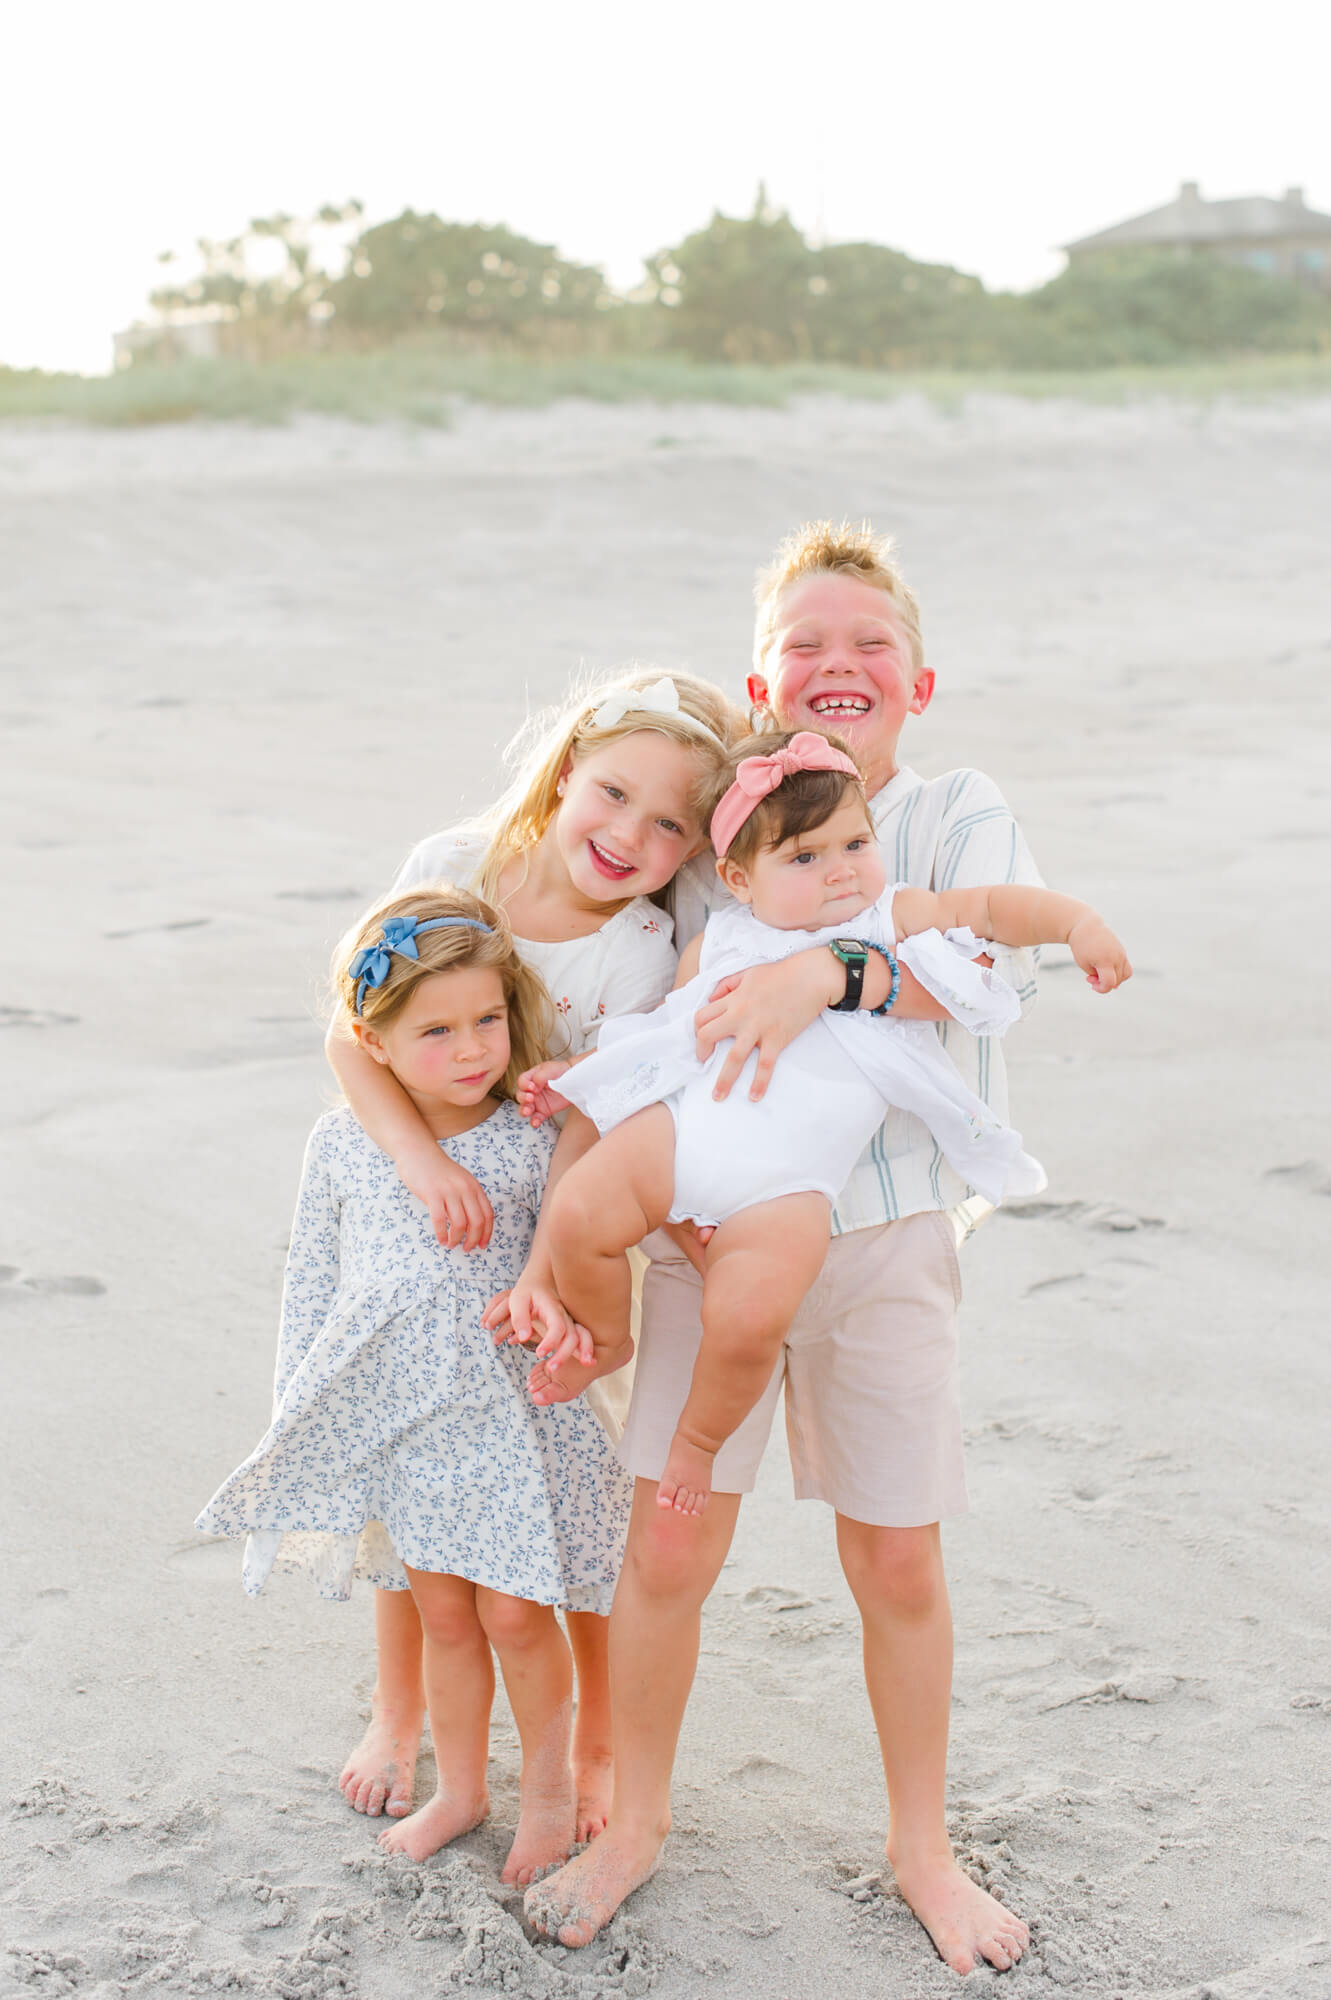 Adorable siblings all hugged in close for a photo on the beach Orlando toy stores